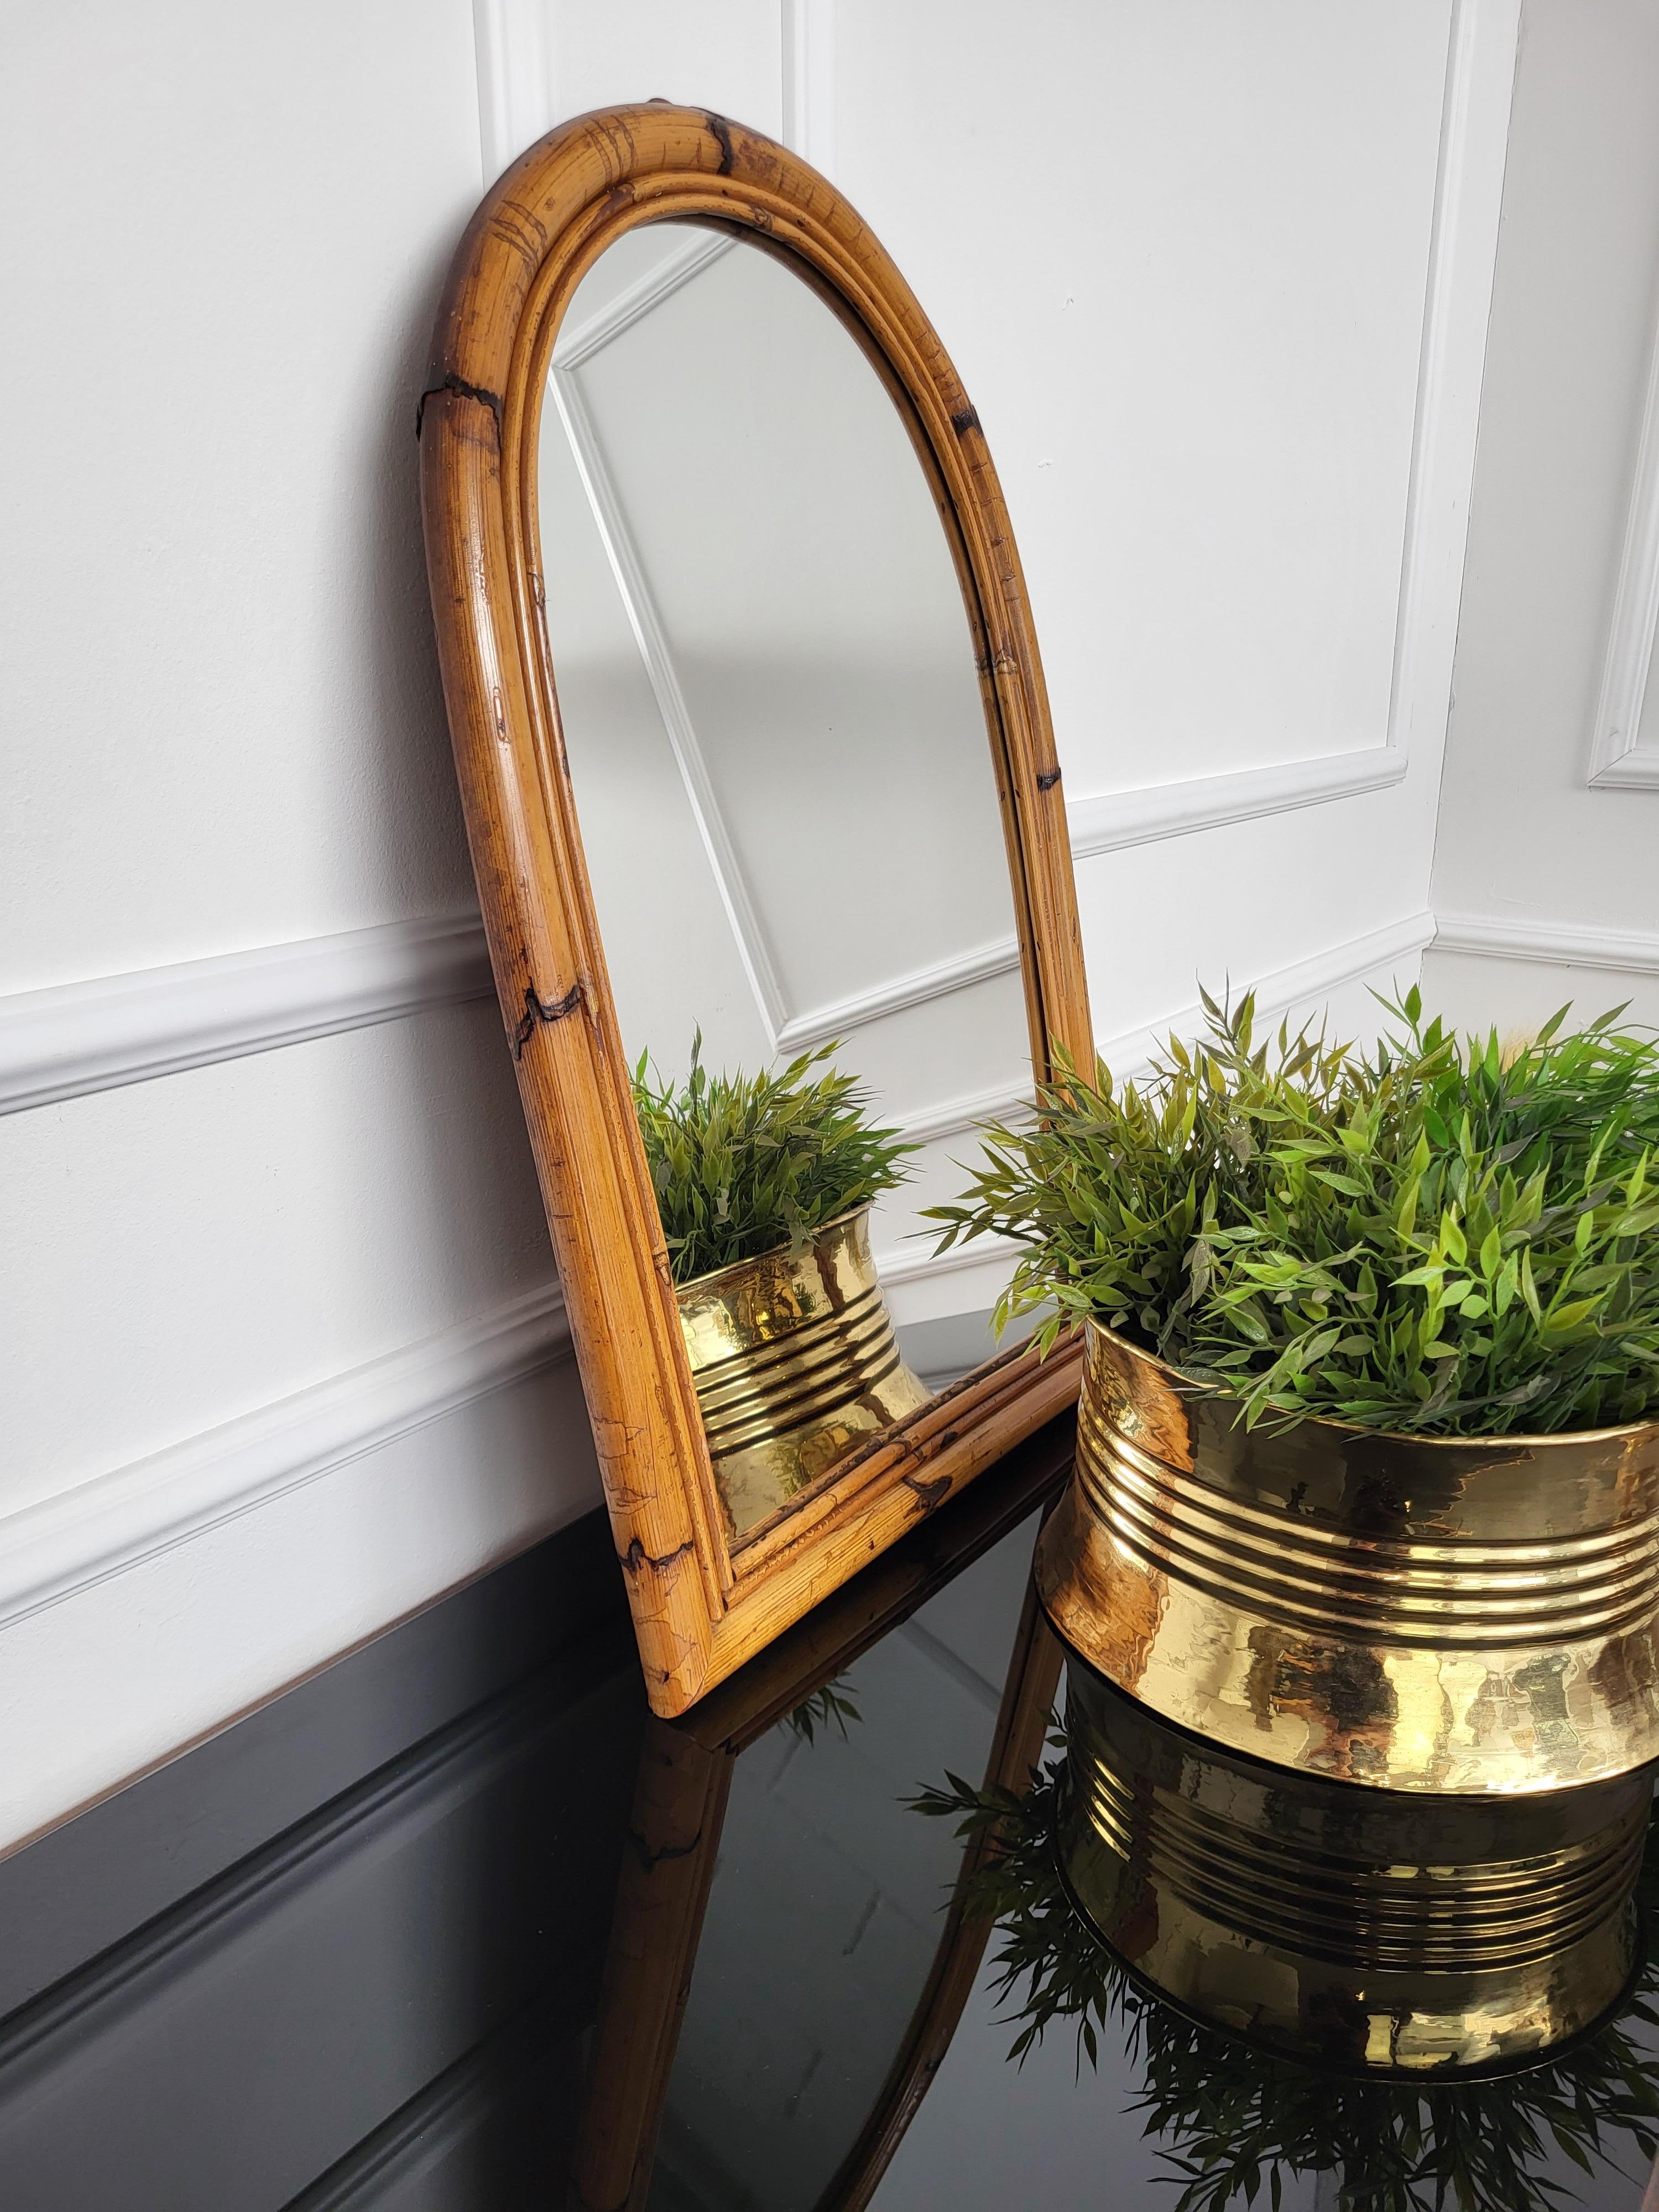 Beautiful 1960s Italian Mid-Century Modern arched mirror, perfect in any room or in a bedroom. This charming piece is in the typical style of Audoux and Minet where the organic beauty of the woven materials is timeless and Classic, making bamboo and